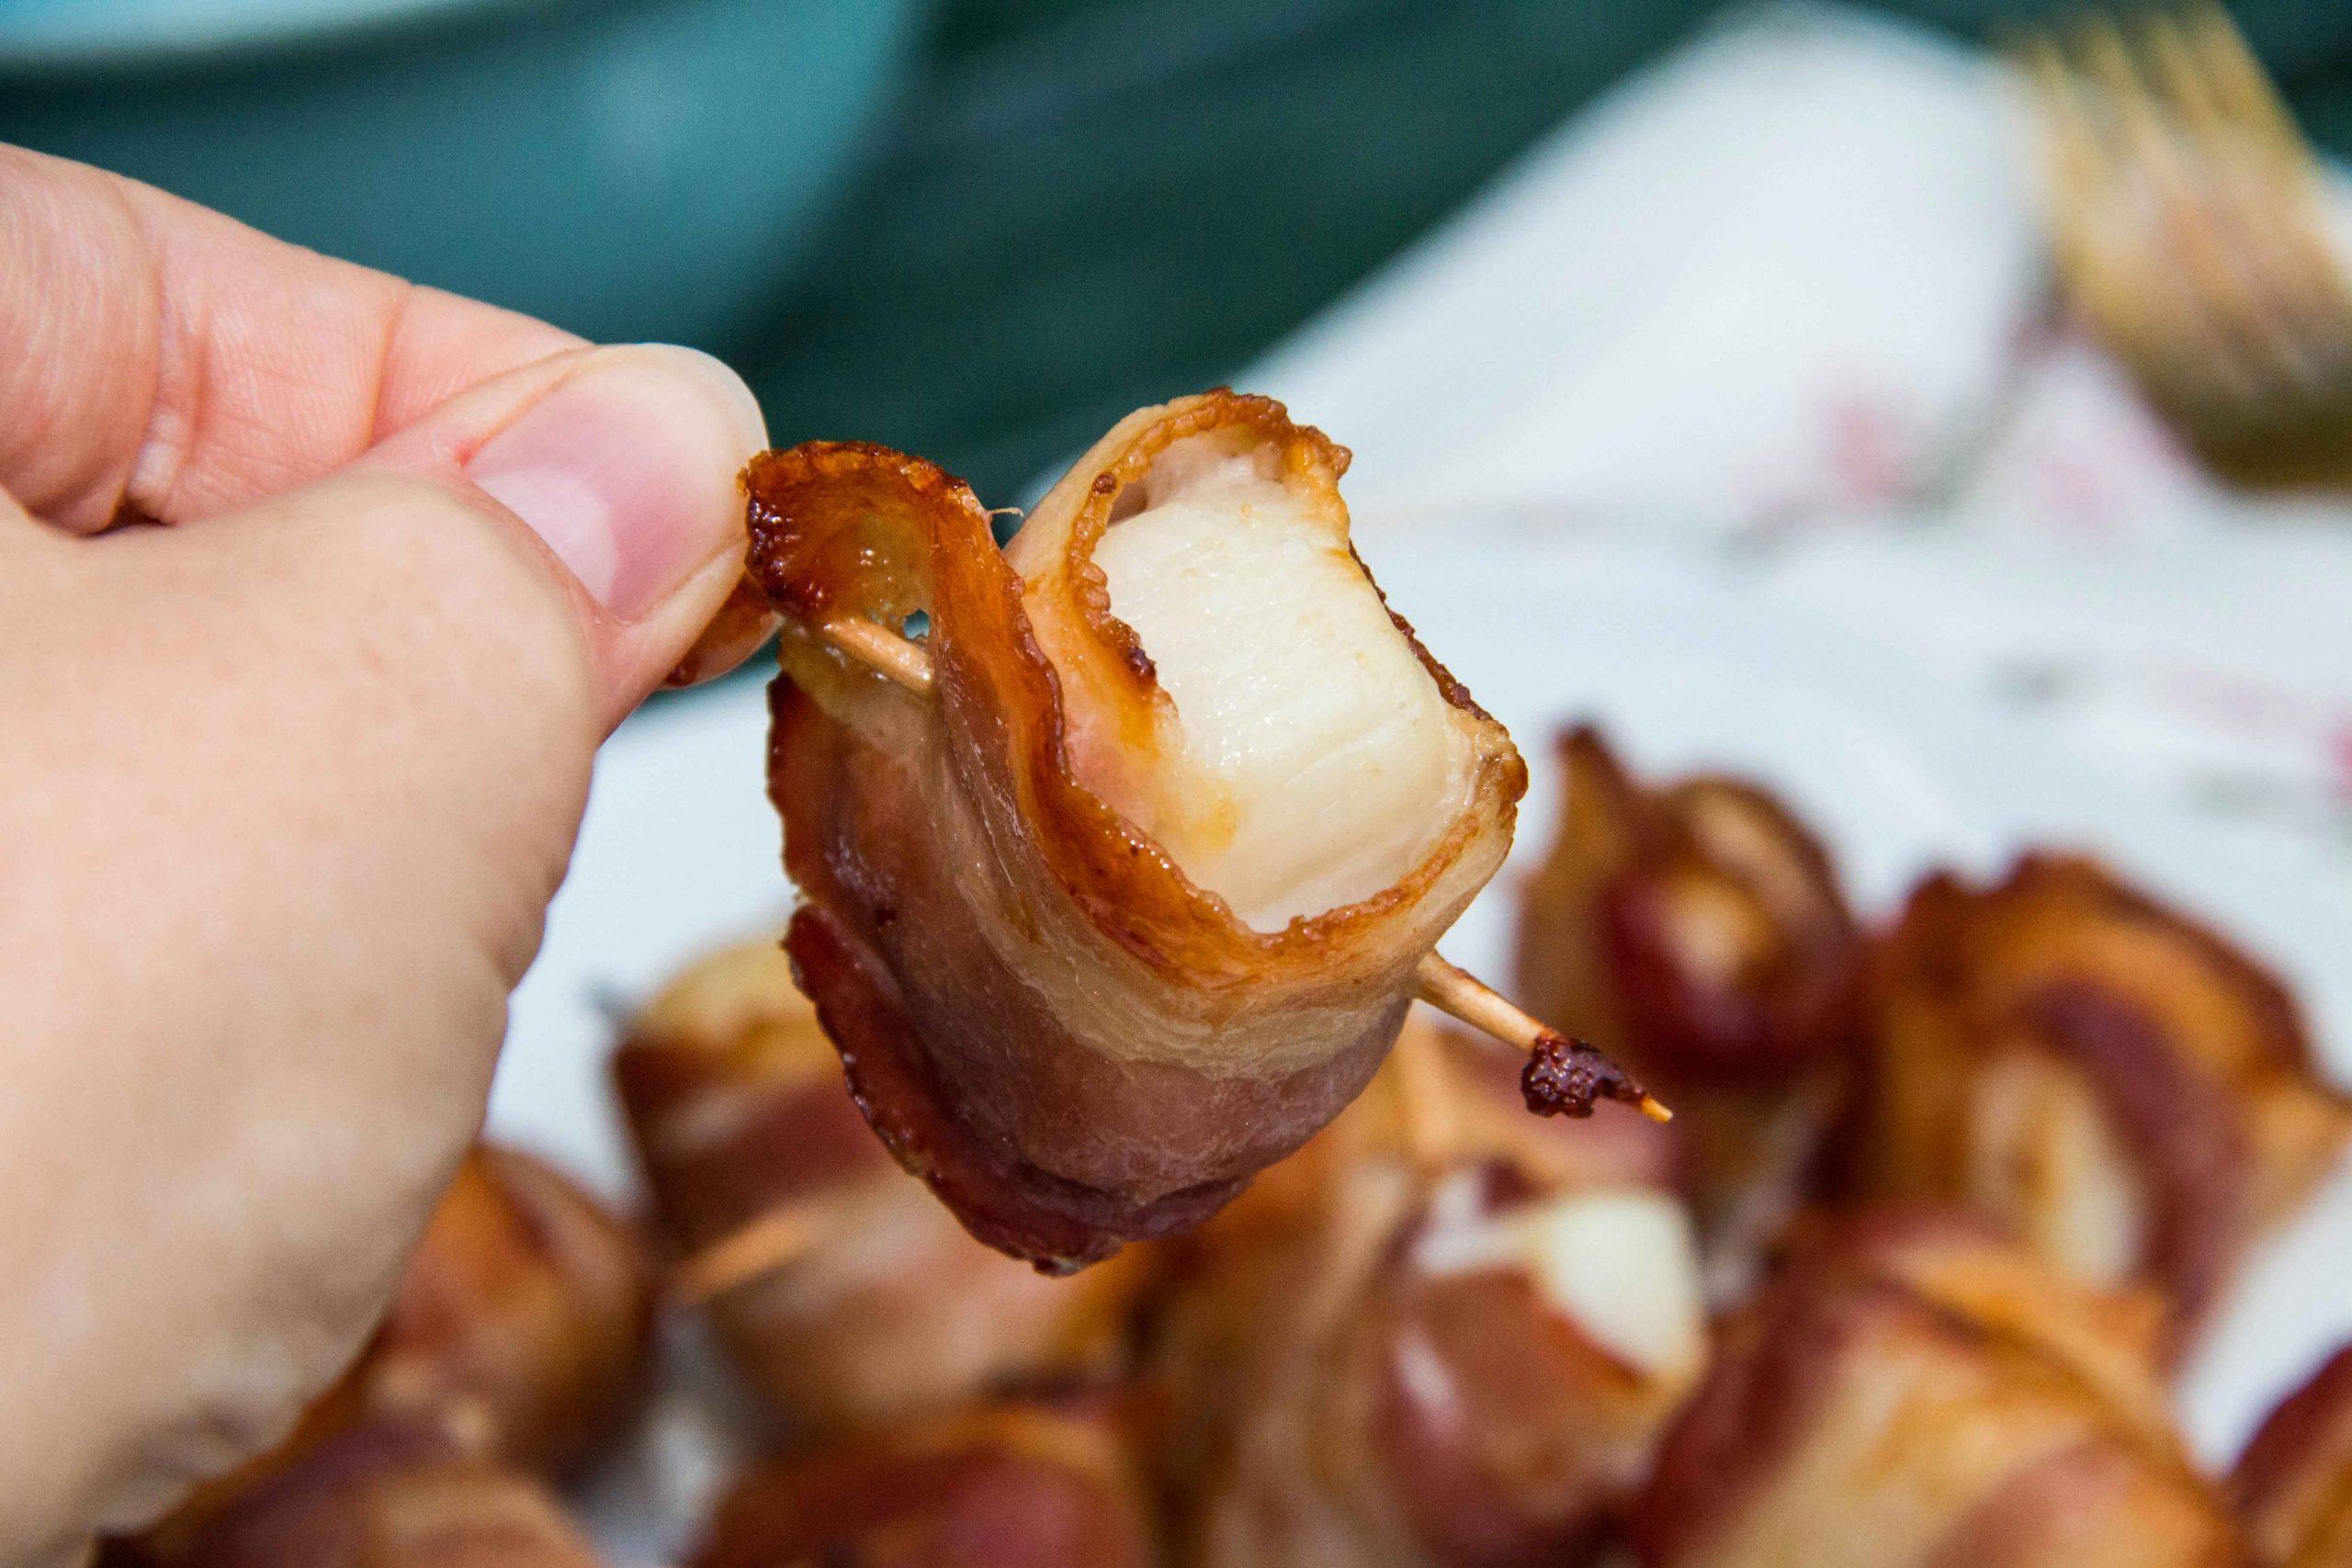 Bacon wrapped scallops are the perfect dinner party appetizer. They look fancy and time-consuming but they're so easy to make. A favorite at many events!